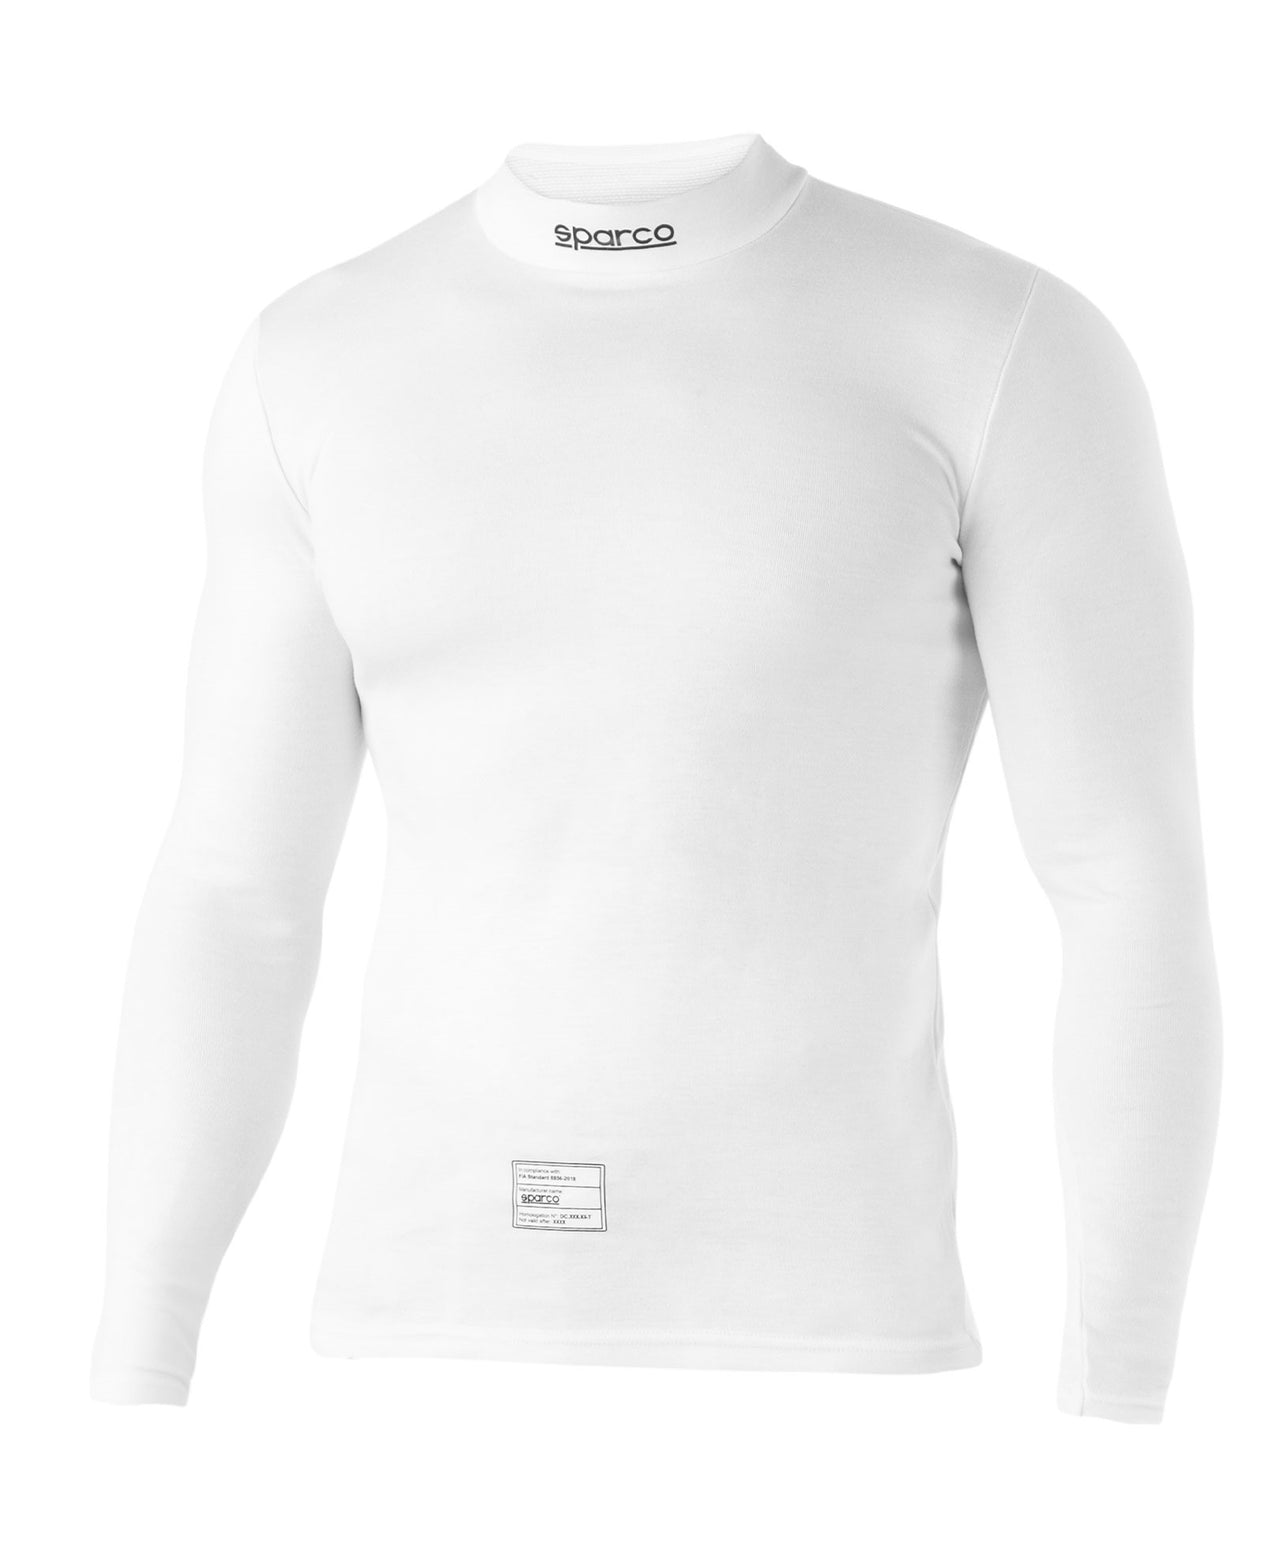 Sparco RW-4 Nomex Fireproof Shirt